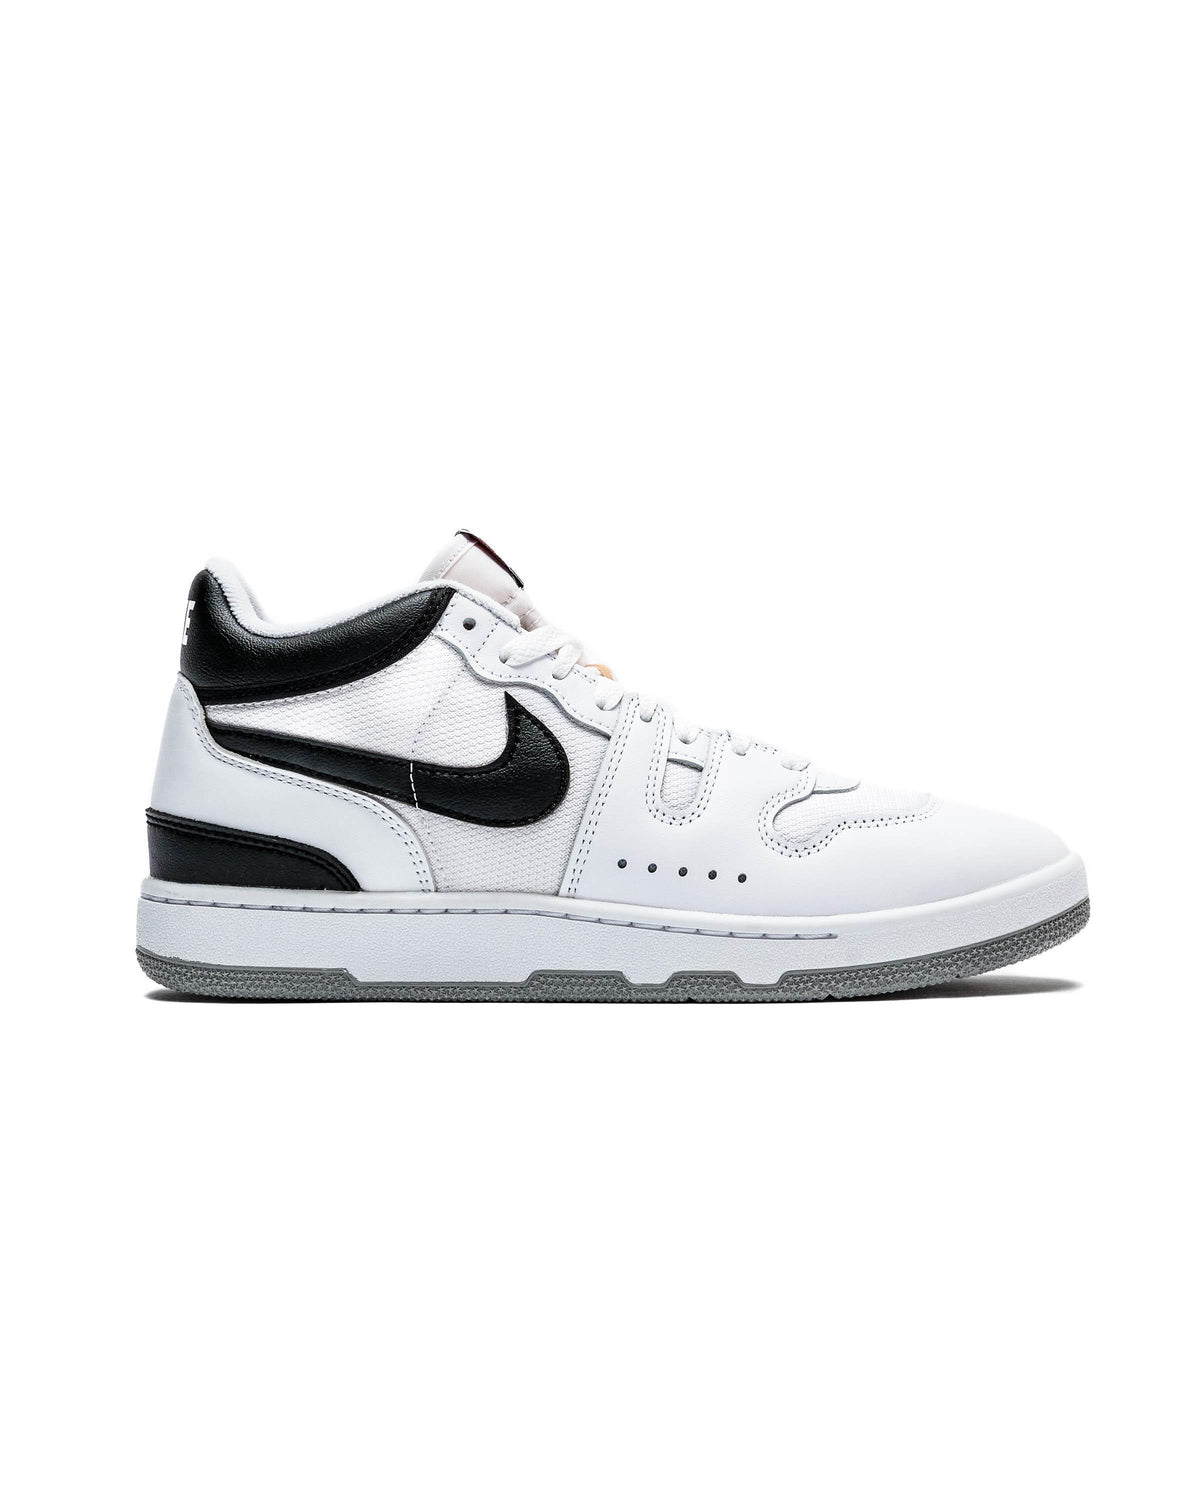 Nike ATTACK QS SP